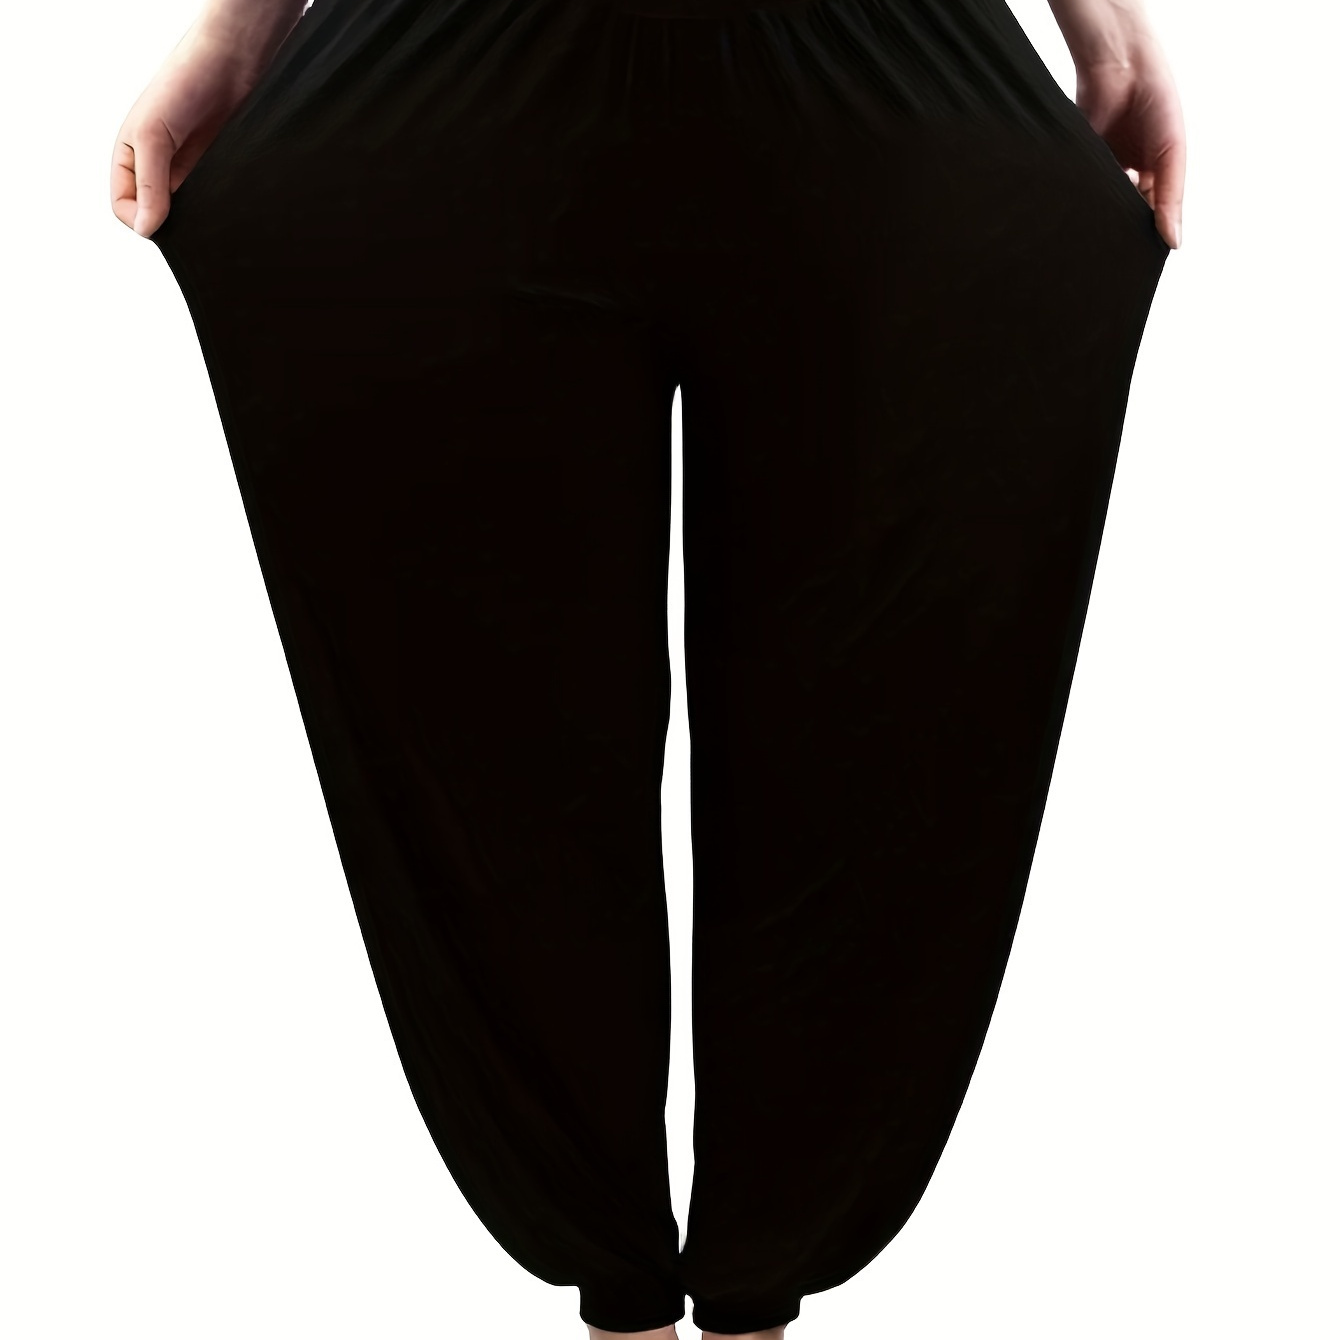 

Plus Size Solid Baggy Jggers, Casual High Waist Pants, Women's Plus Size Clothing